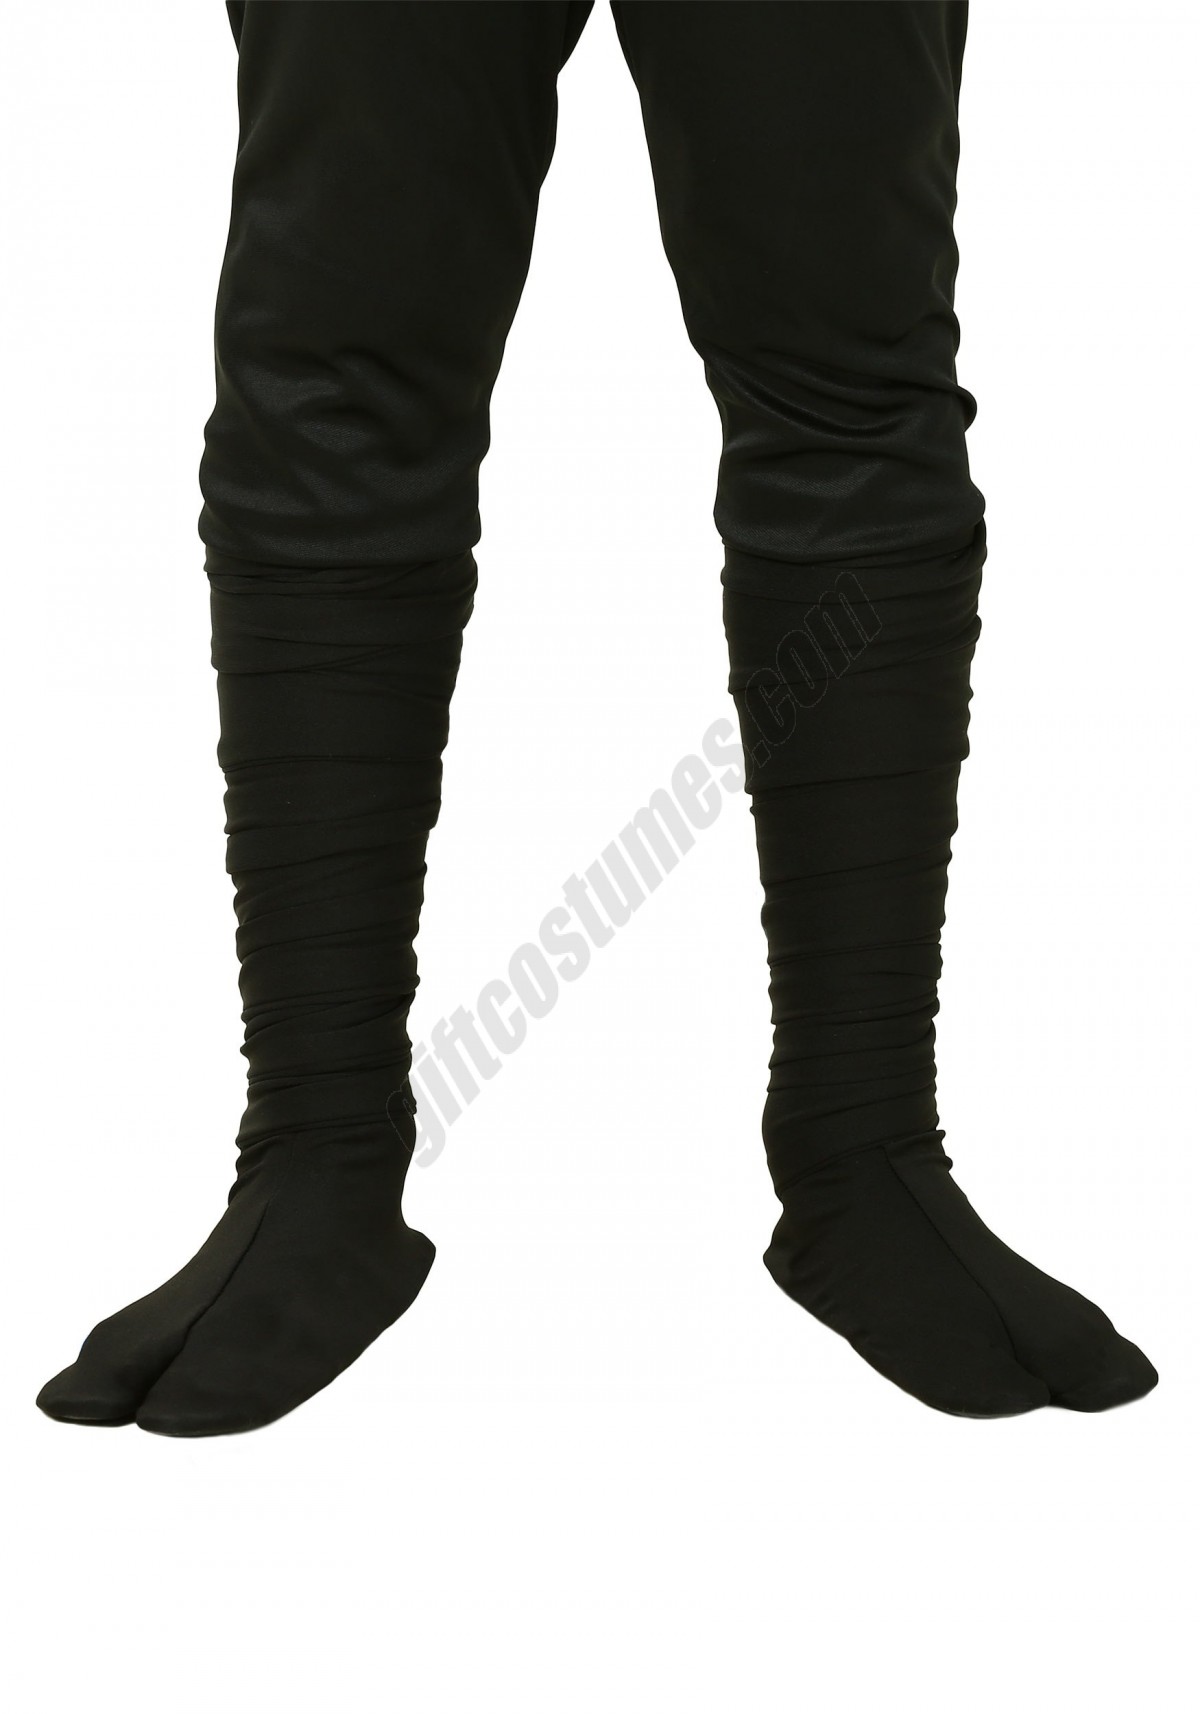 Ninja Costume Boots for Kids Promotions - -0